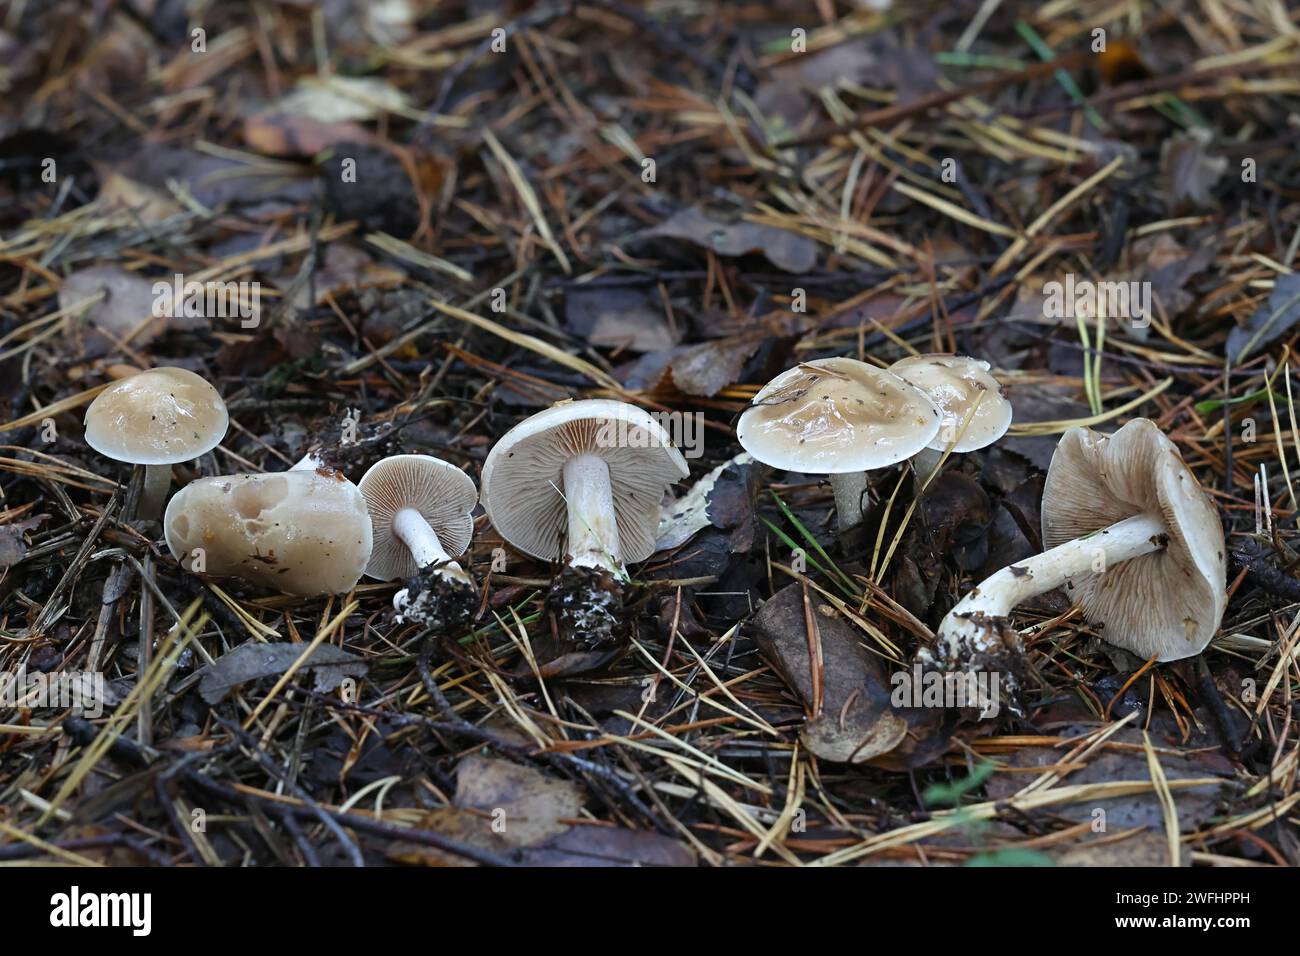 Hebeloma velutipes, commonly known as pale poisonpie or poison pie, wild mushroom from Finland Stock Photo